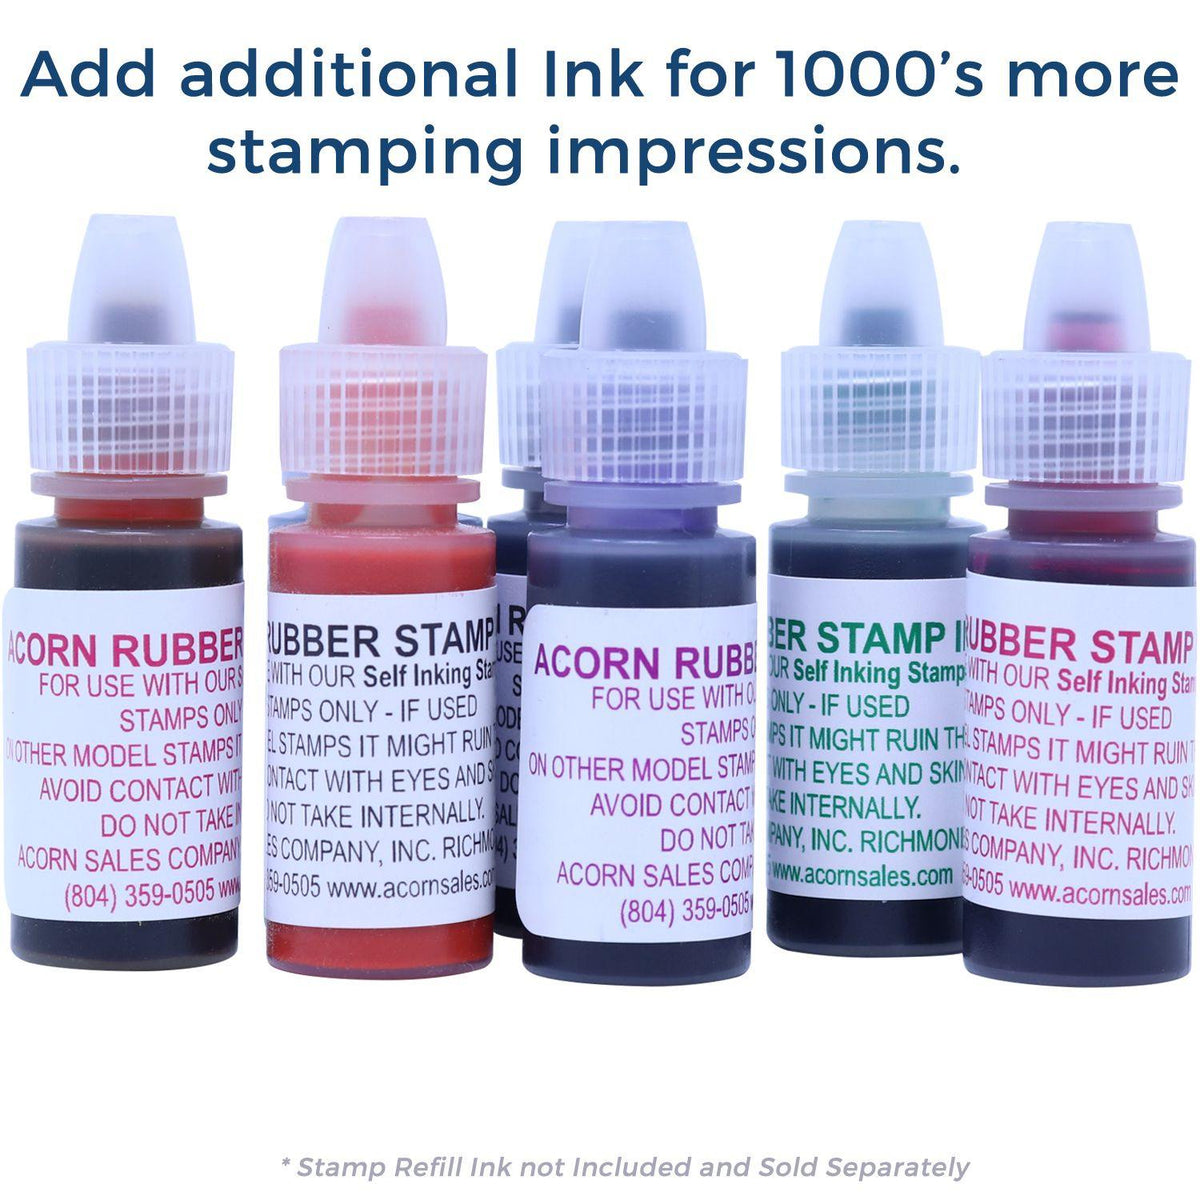 Refill Inks for Large Pre-Inked Curly Copy Stamp Available